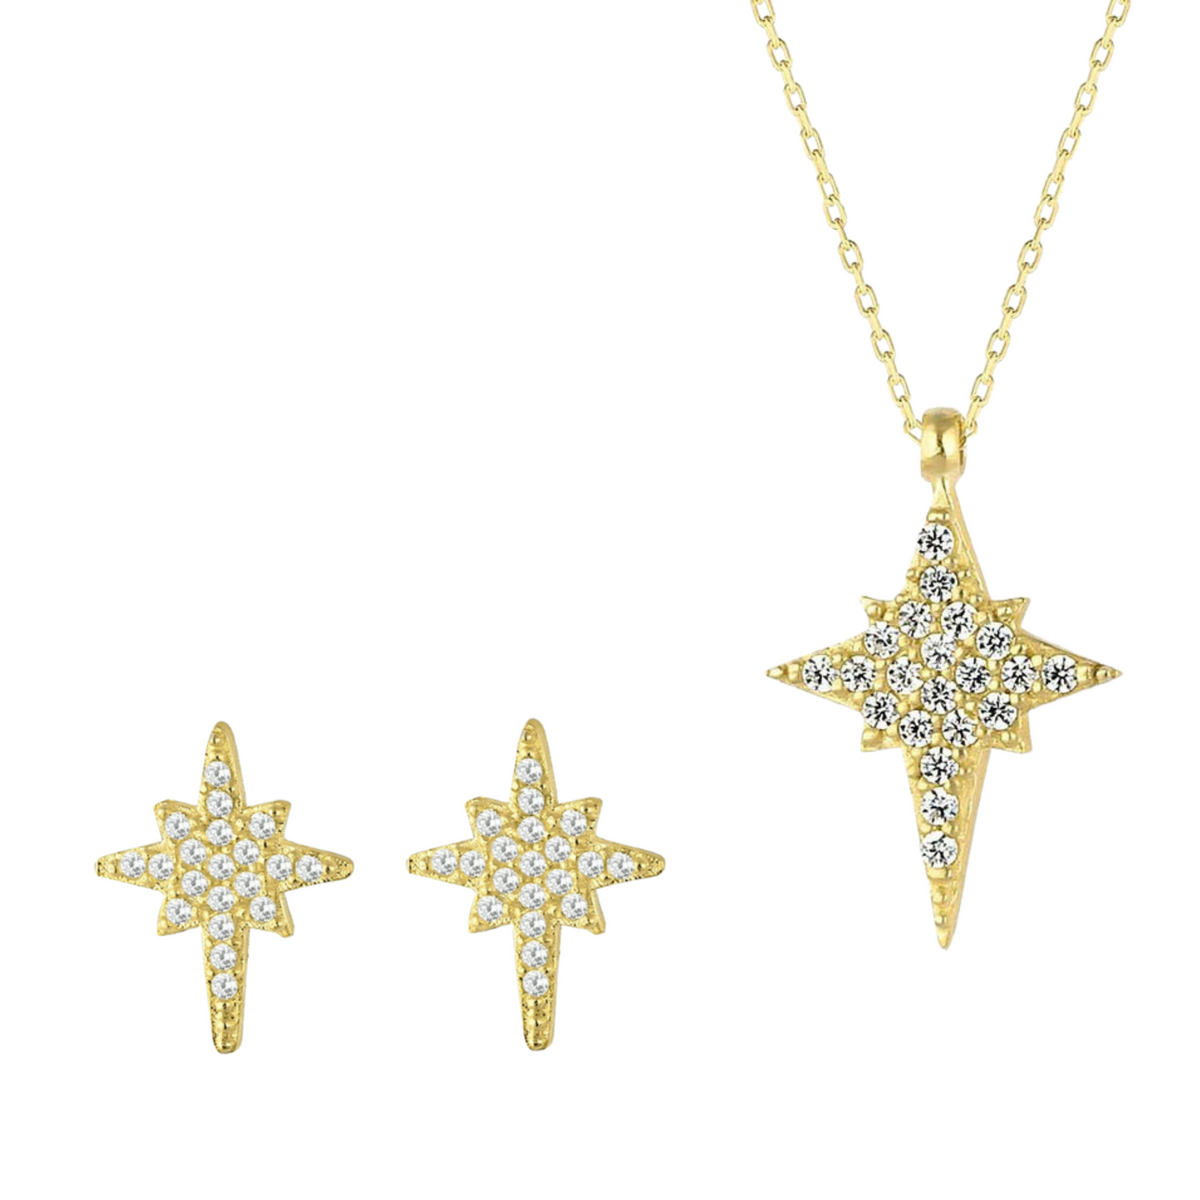 Northern Star Polaris Sterling Silver Necklace and Stud Earring Set